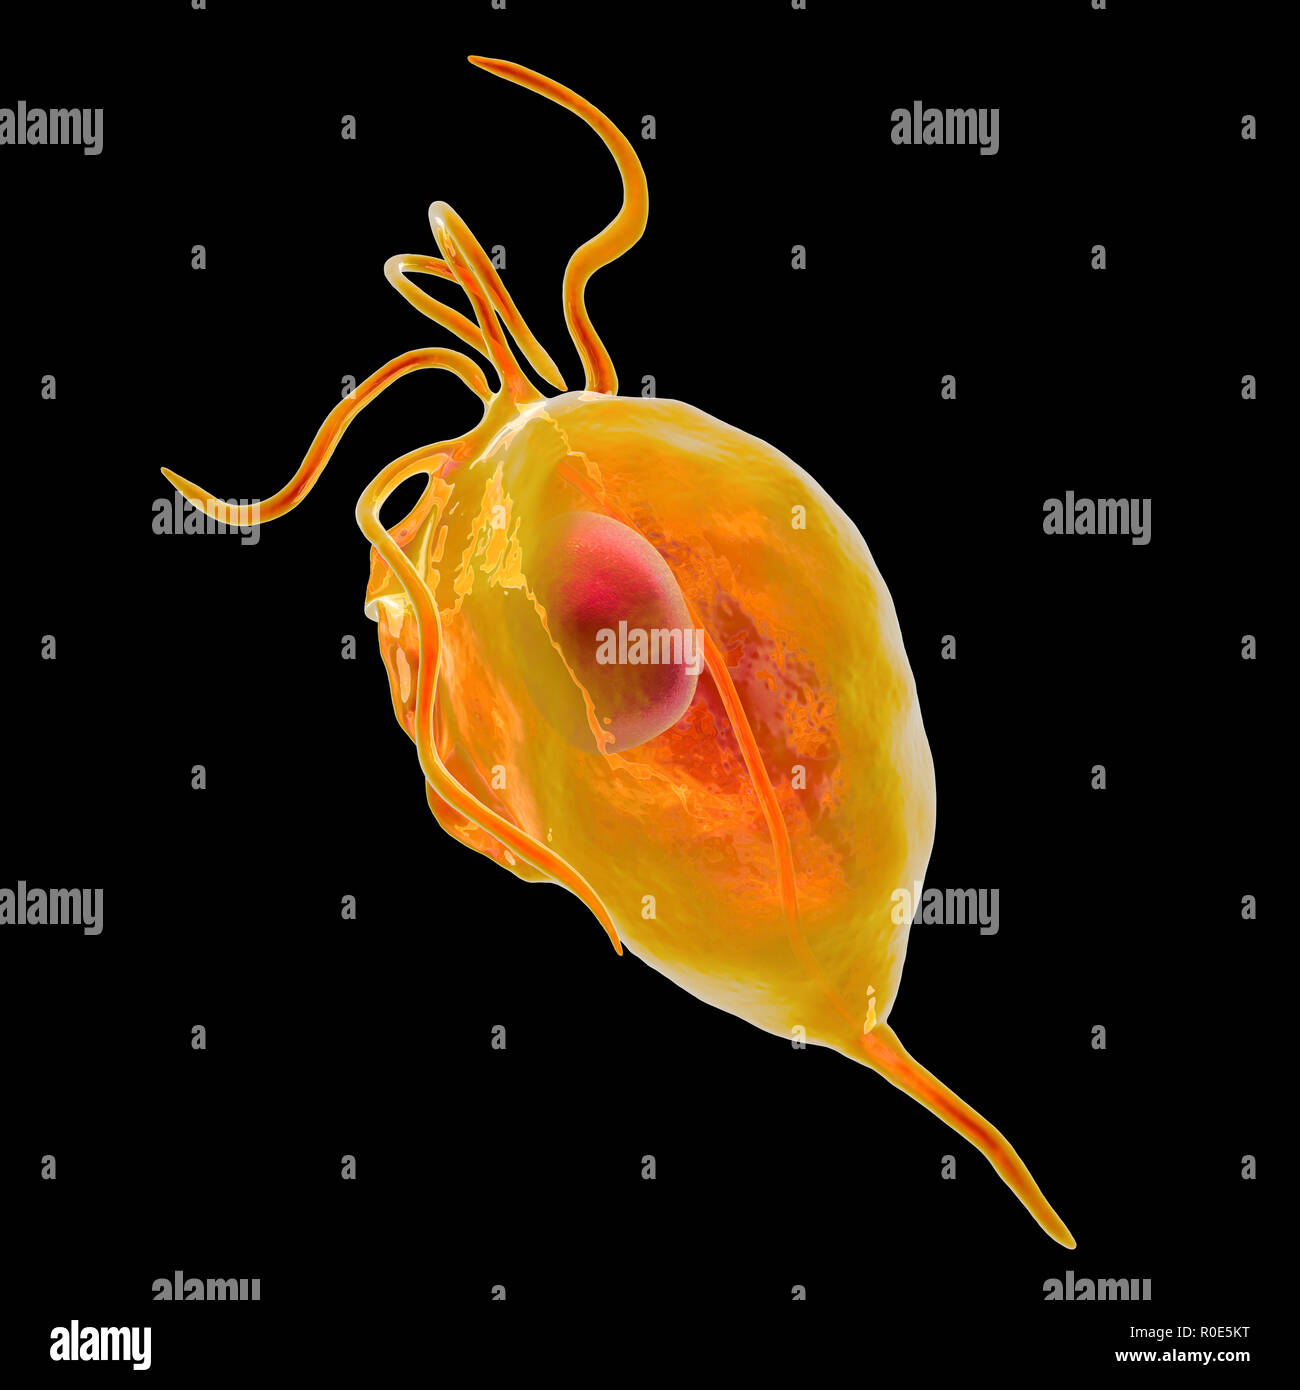 Trichomonas vaginalis, computer illustration. Trichomonas vaginalis is a parasitic microorganism that is the causative agent of trichomoniasis. Trichomoniasis is a common cause of vaginitis and is a sexually transmitted disease. Stock Photo